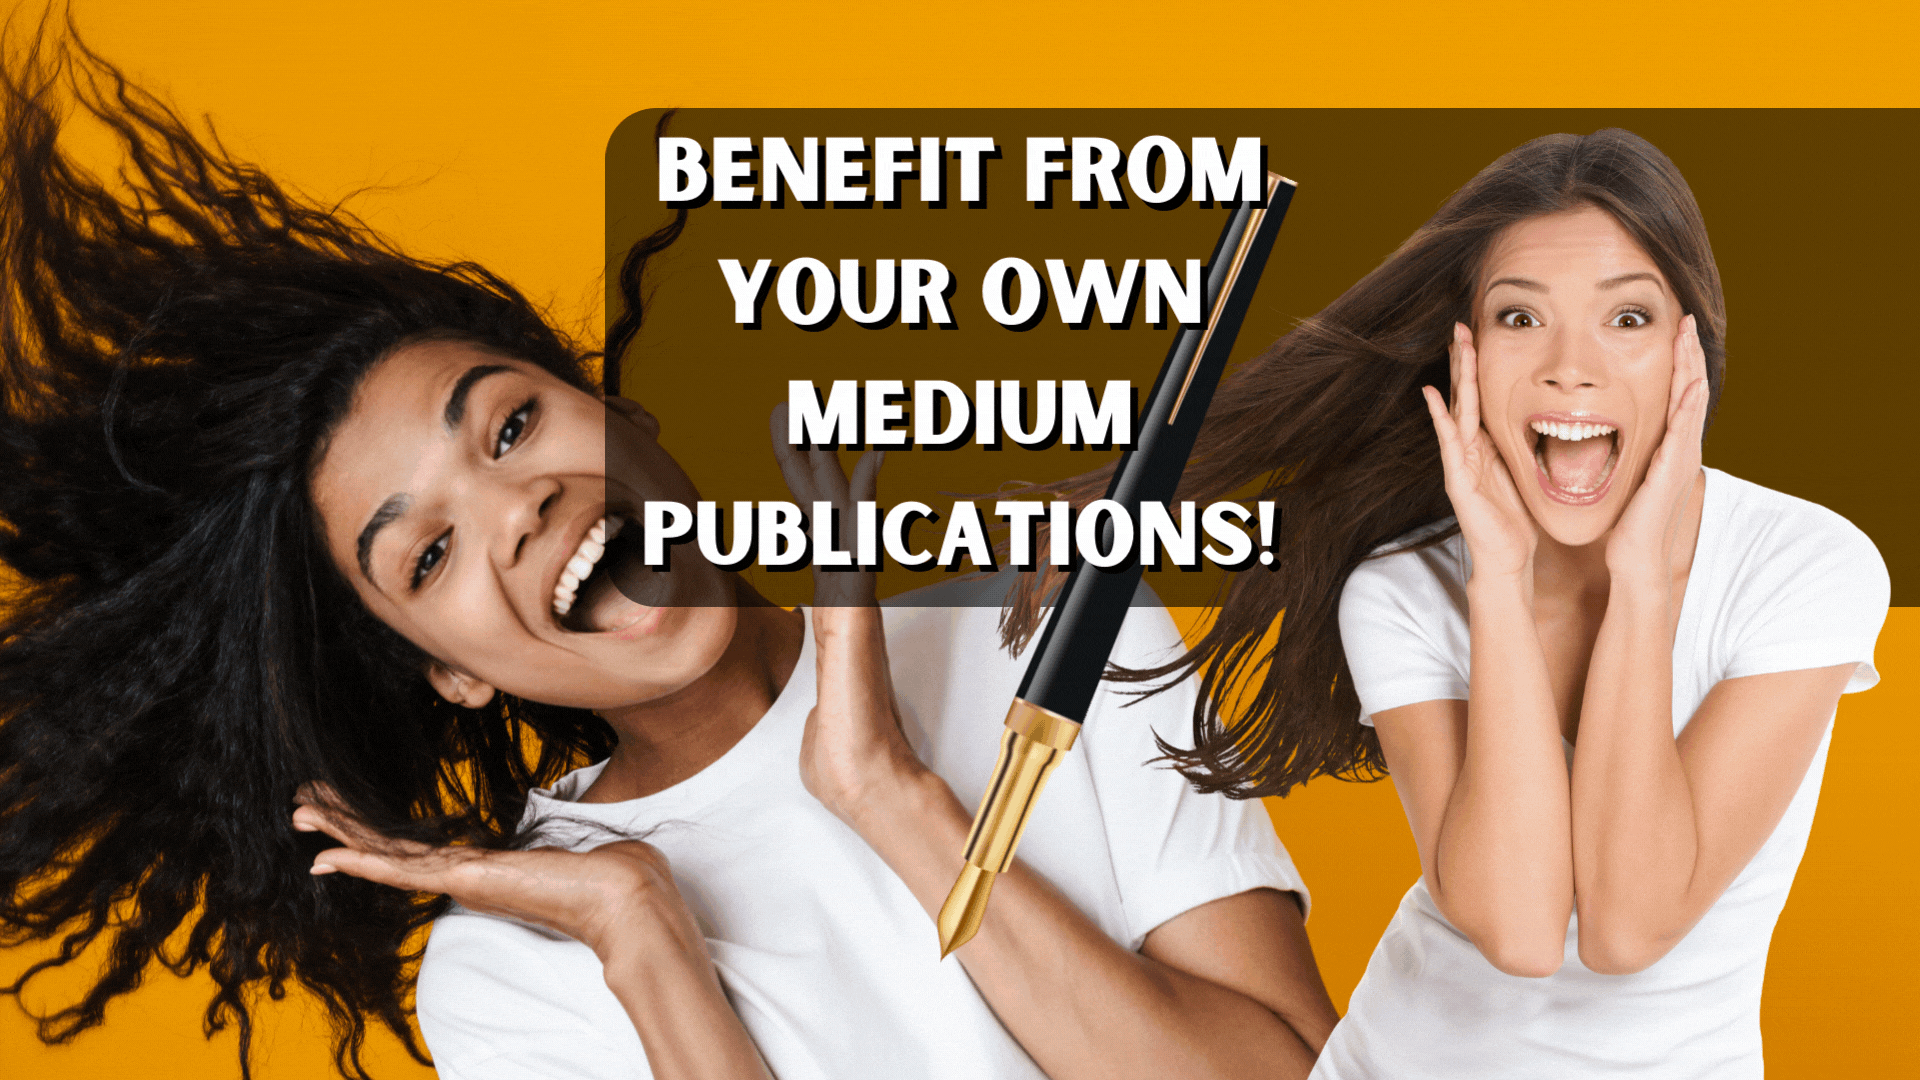 Learn How To Benefit From Having Your Own Medium Publications As A Writer